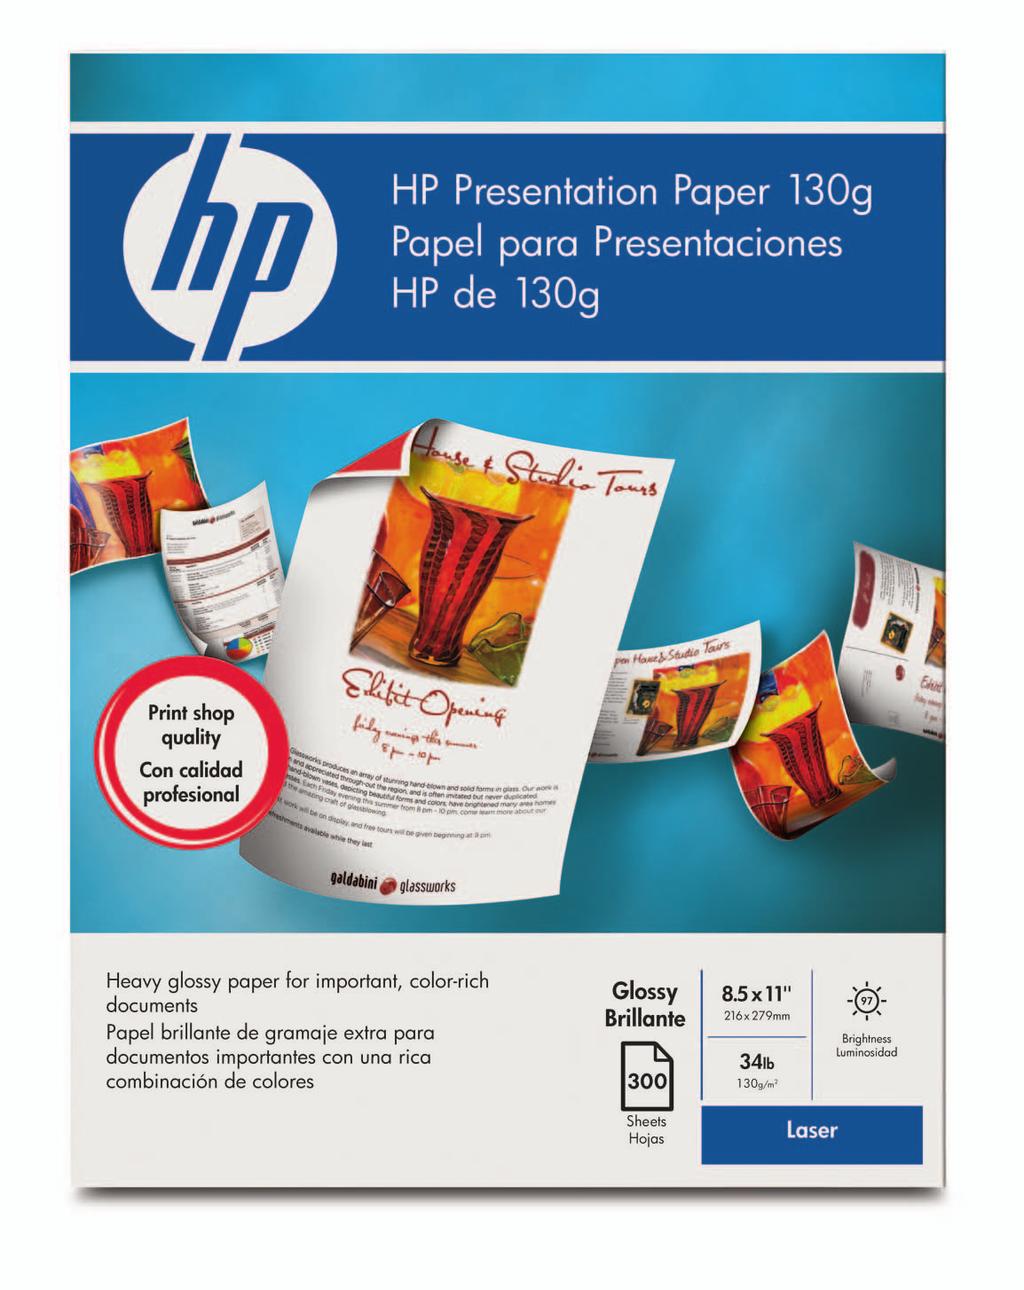 Process Print your idea in-house on HP Professional Papers (matte or glossy). Complete the entire form, attach your idea, and mail to: HP "Making Marketing Materials" Contest P.O.